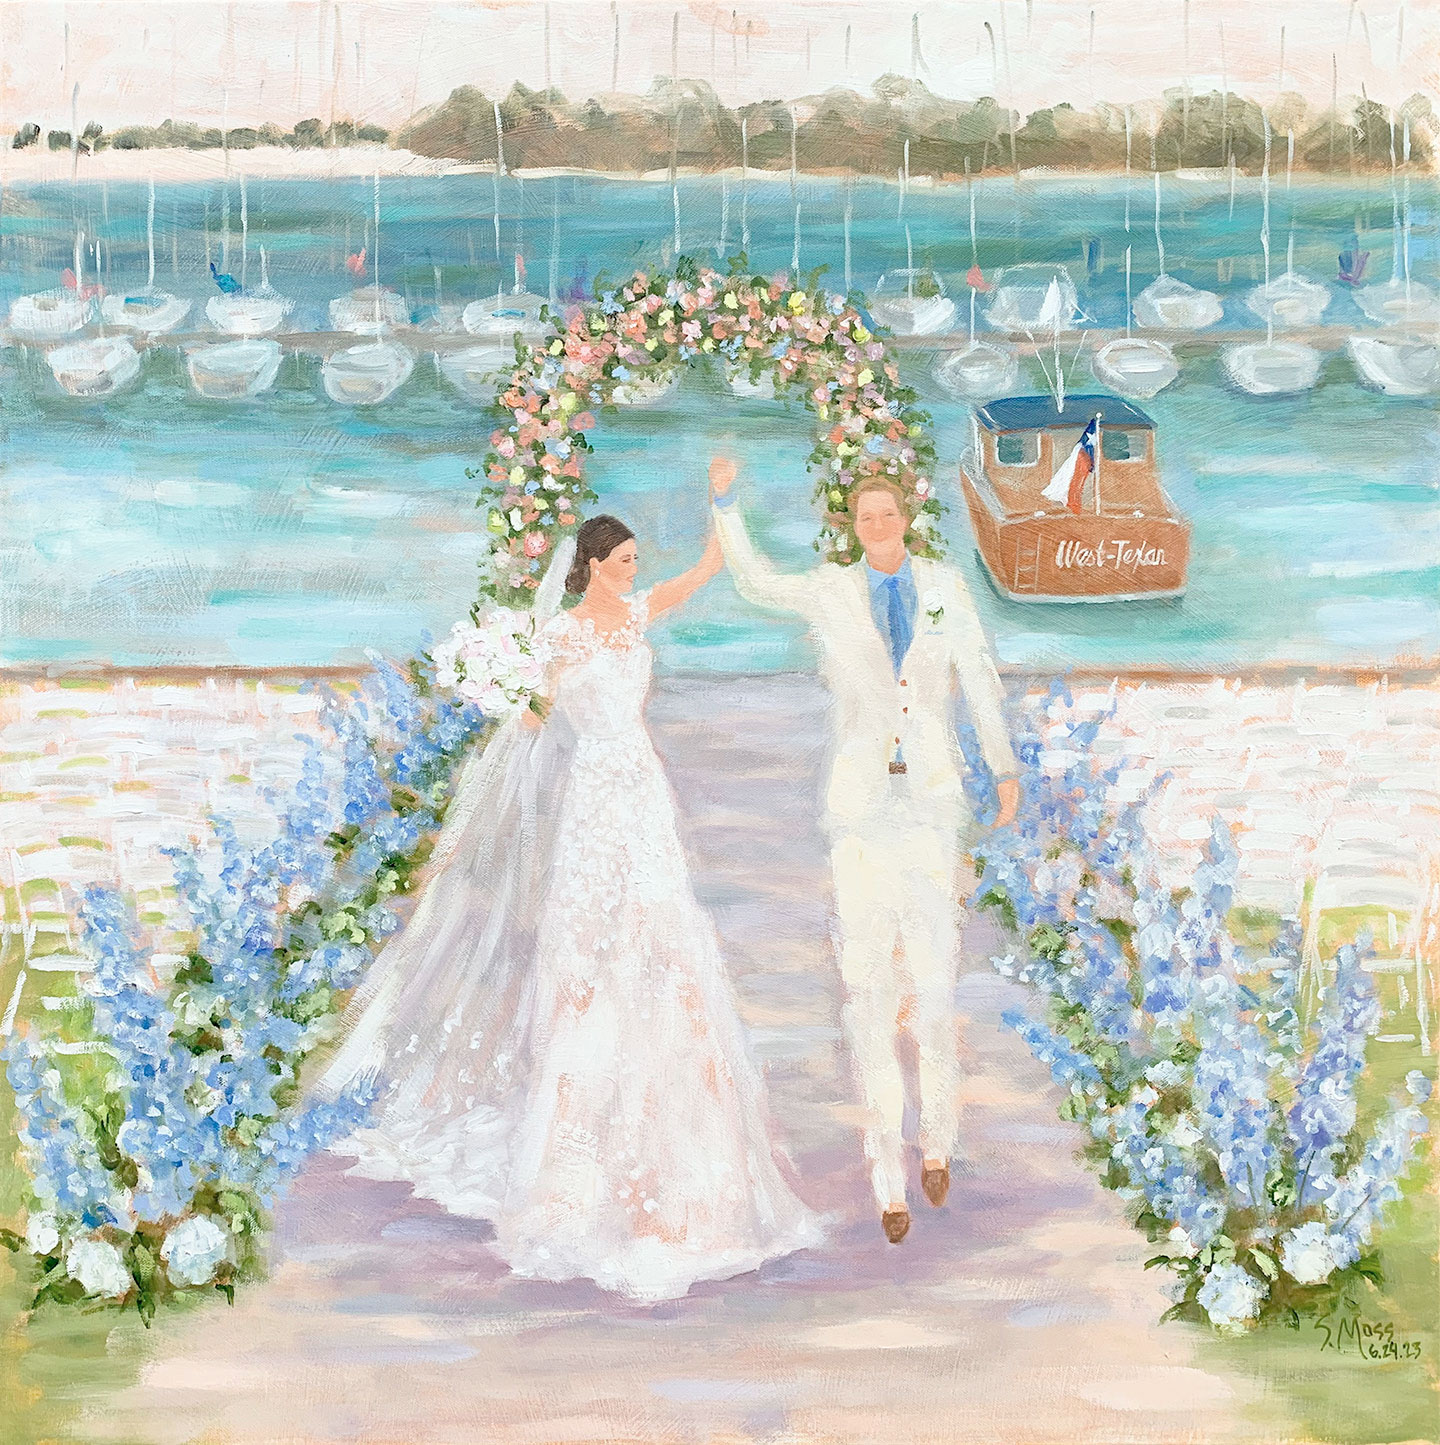 Live Event Wedding Painting, Fort Worth Boat Club by Susan Moss Cooper